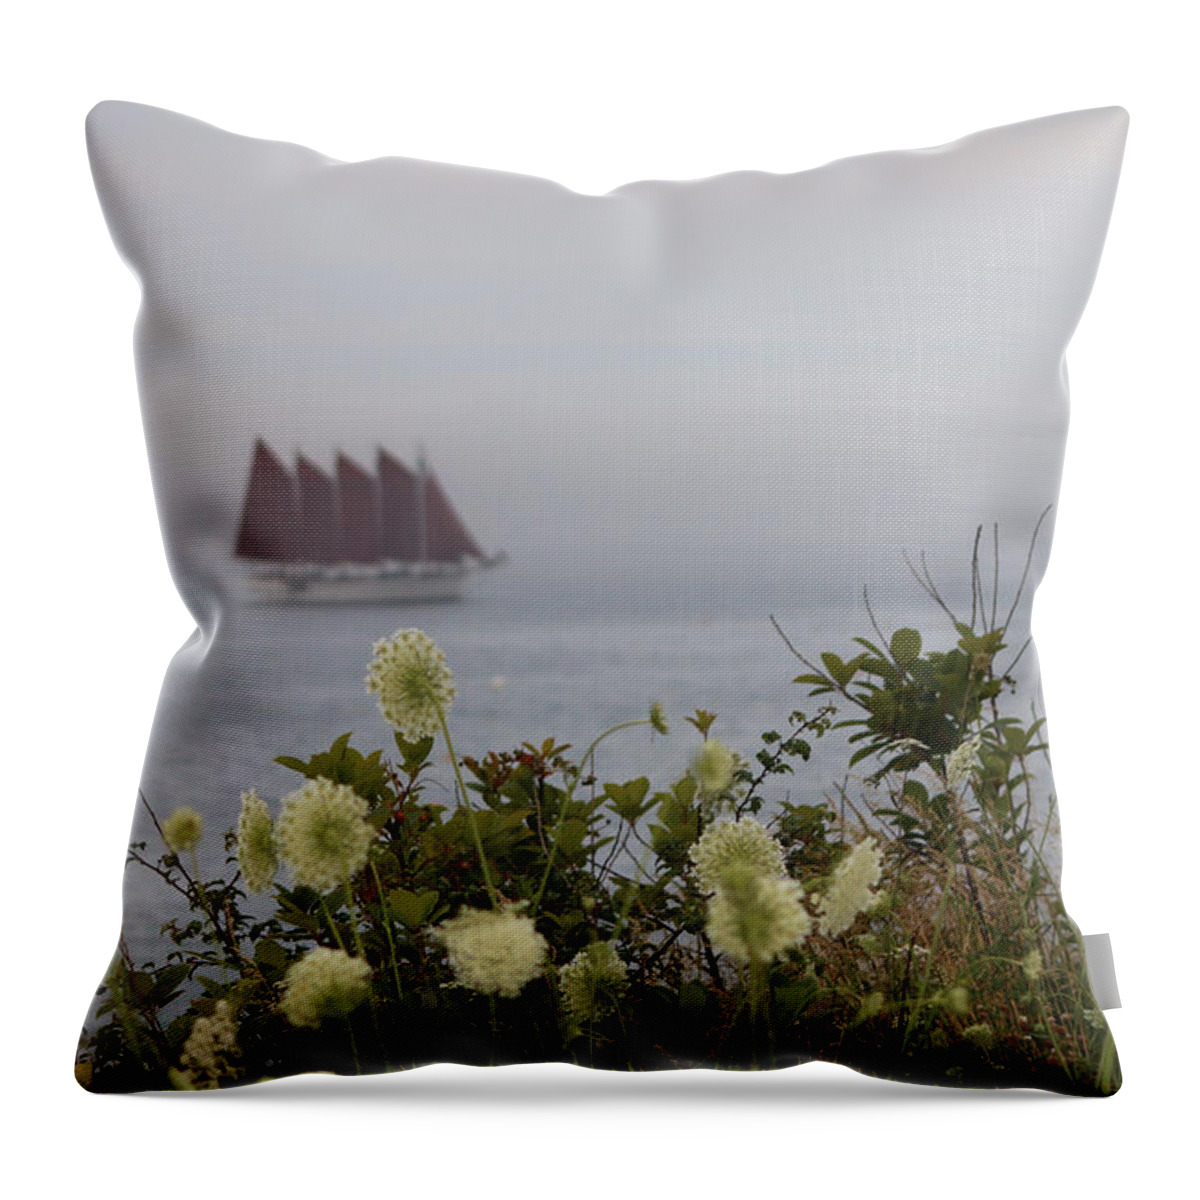 Margaret Todd Throw Pillow featuring the photograph Margaret Todd Sailing On A Foggy Evening by Living Color Photography Lorraine Lynch